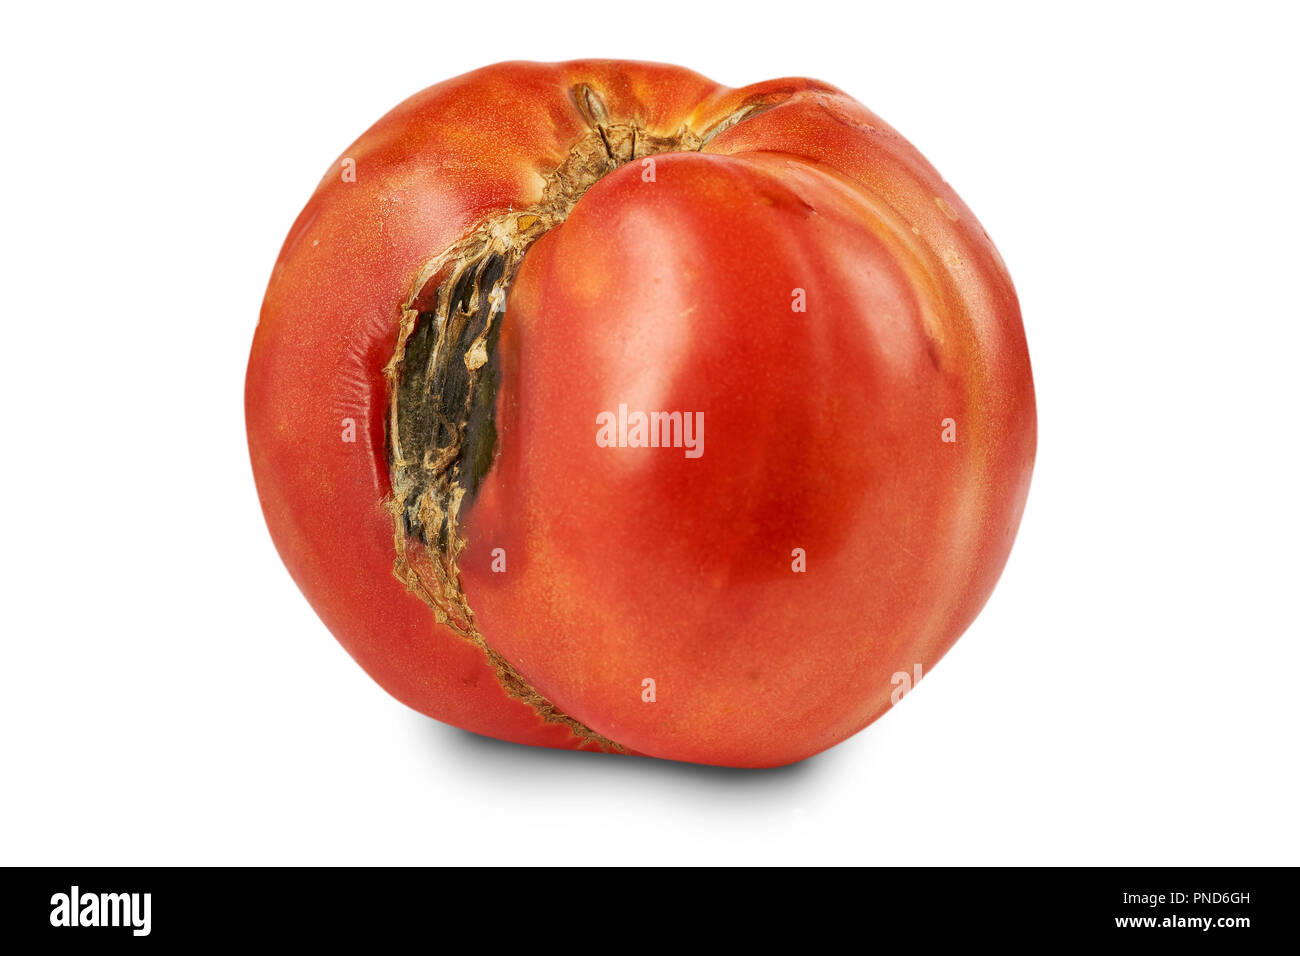 Spoiled, rotten red tomato isolated on white background. Stock Photo